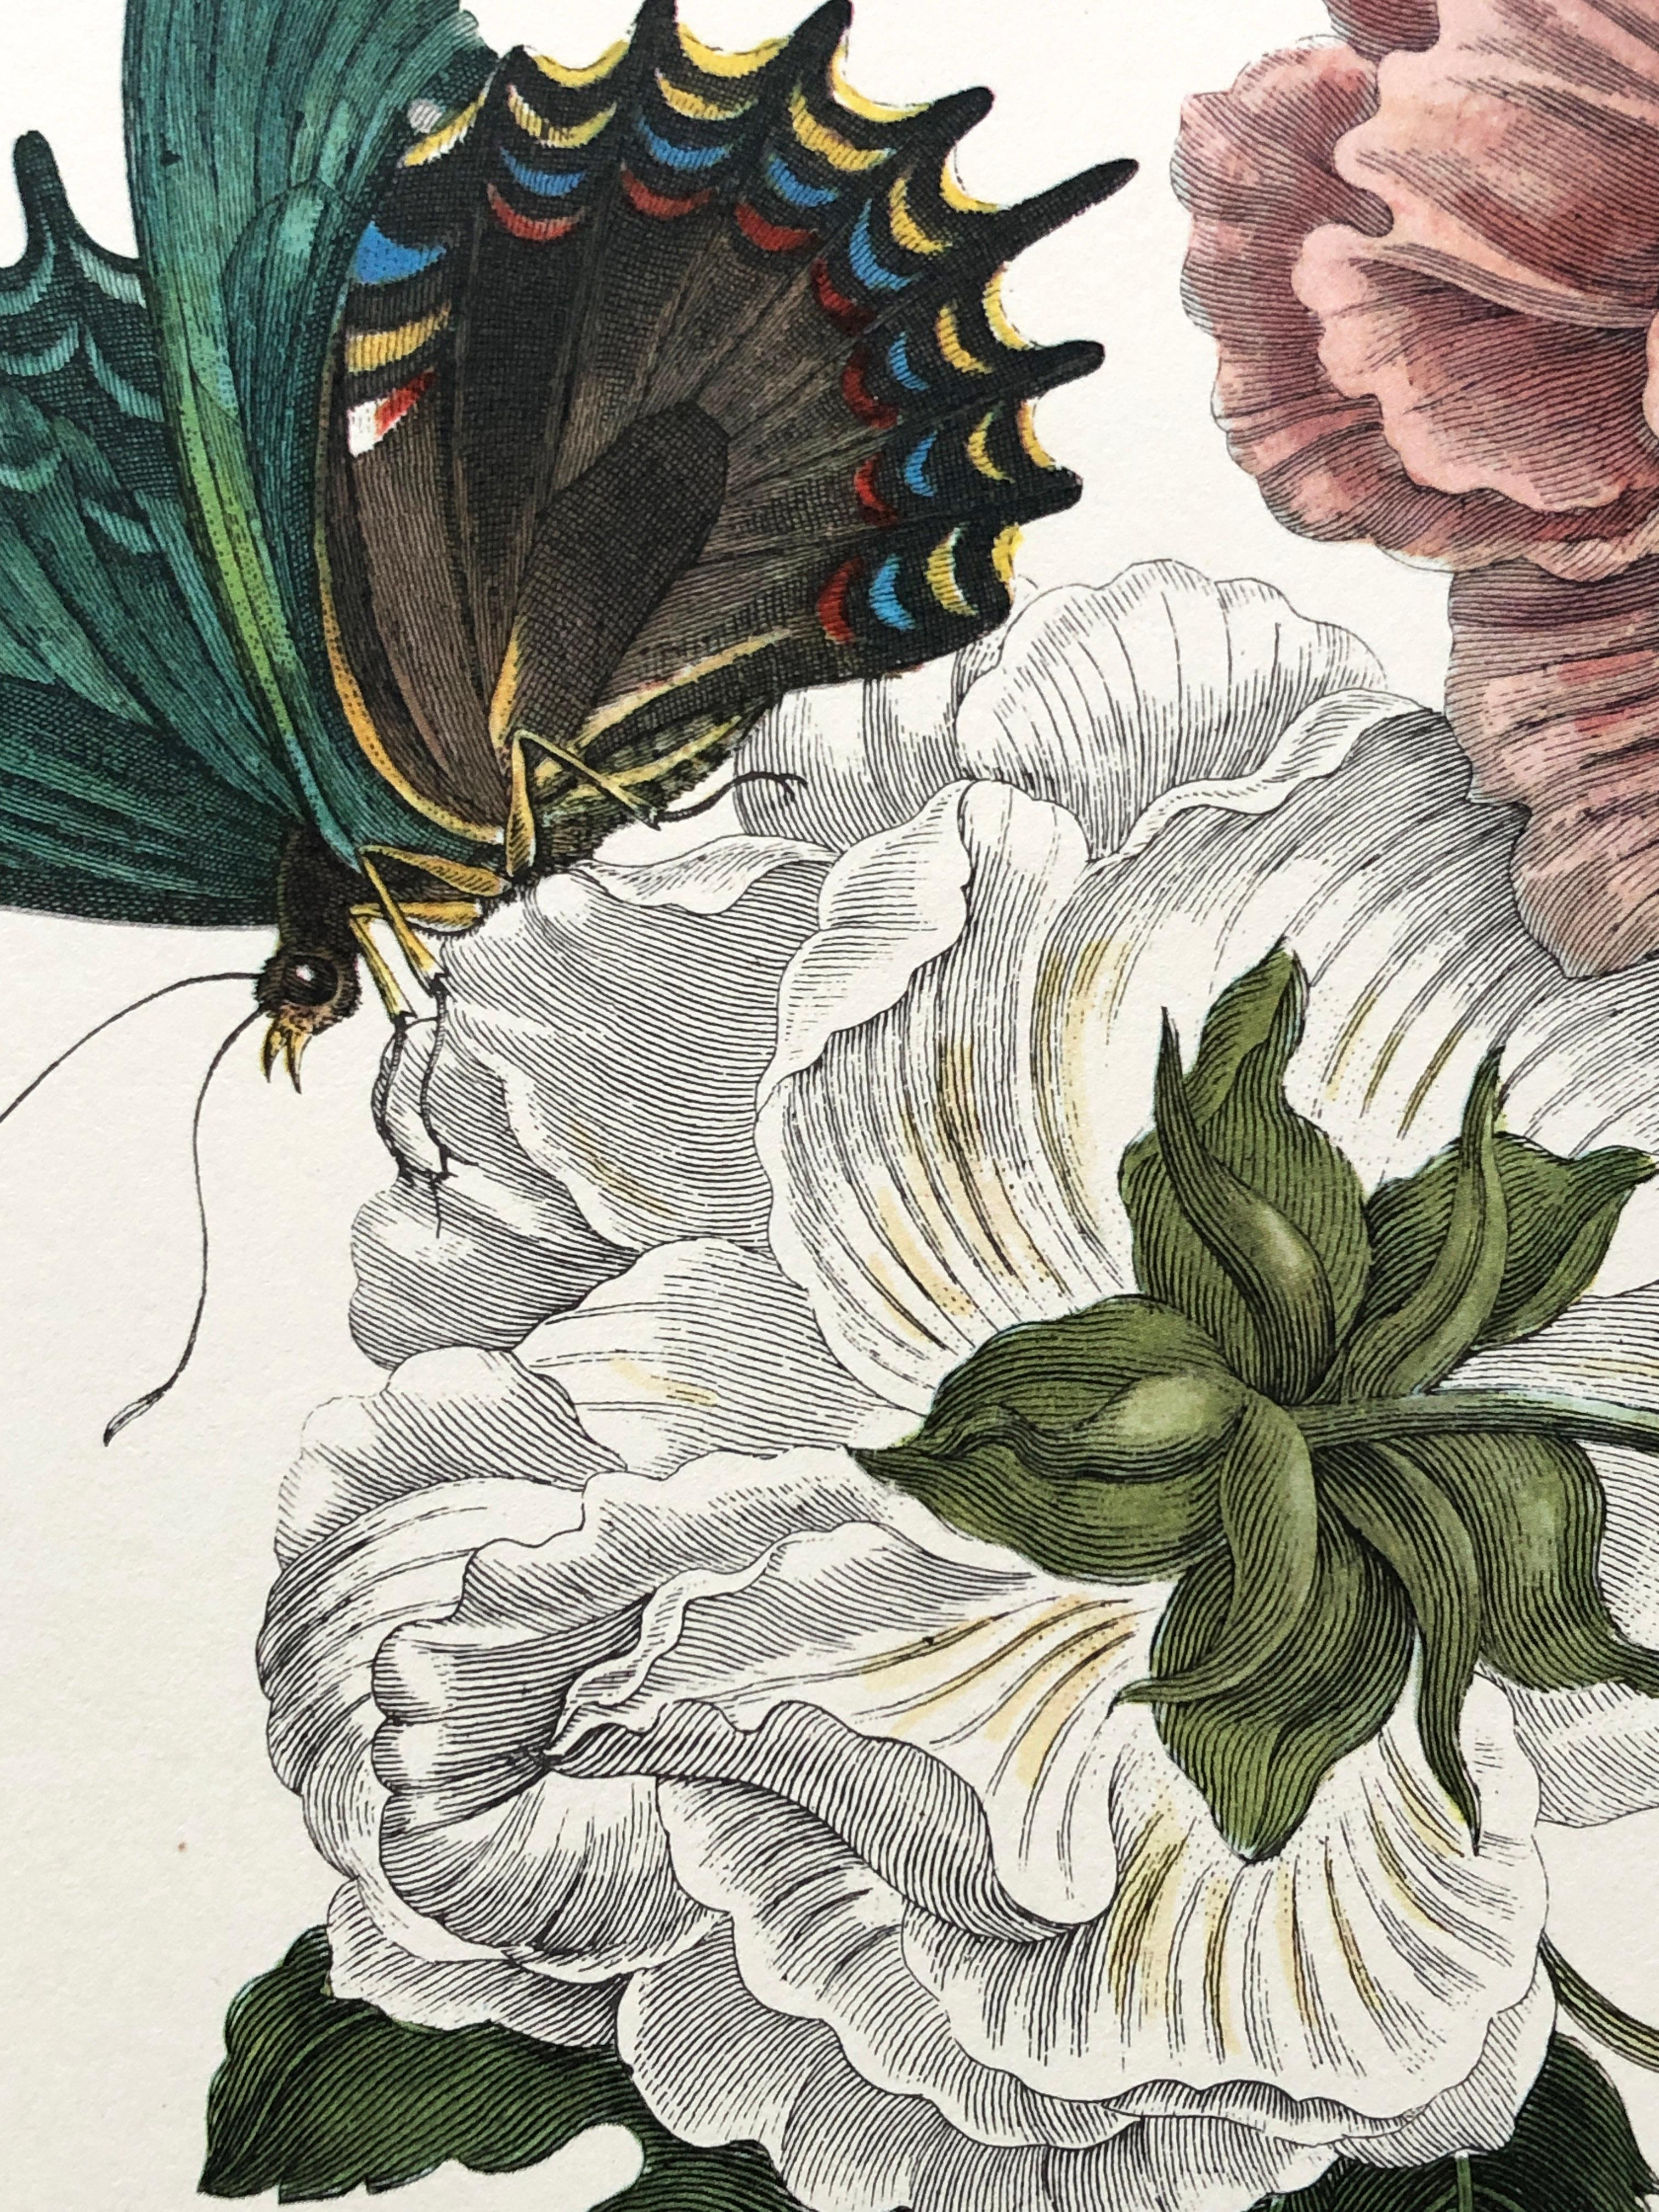 Other Maria Sibylla Merian - P. Sluyter - Hibiscus flowers and swallowtail Nr. 31 For Sale